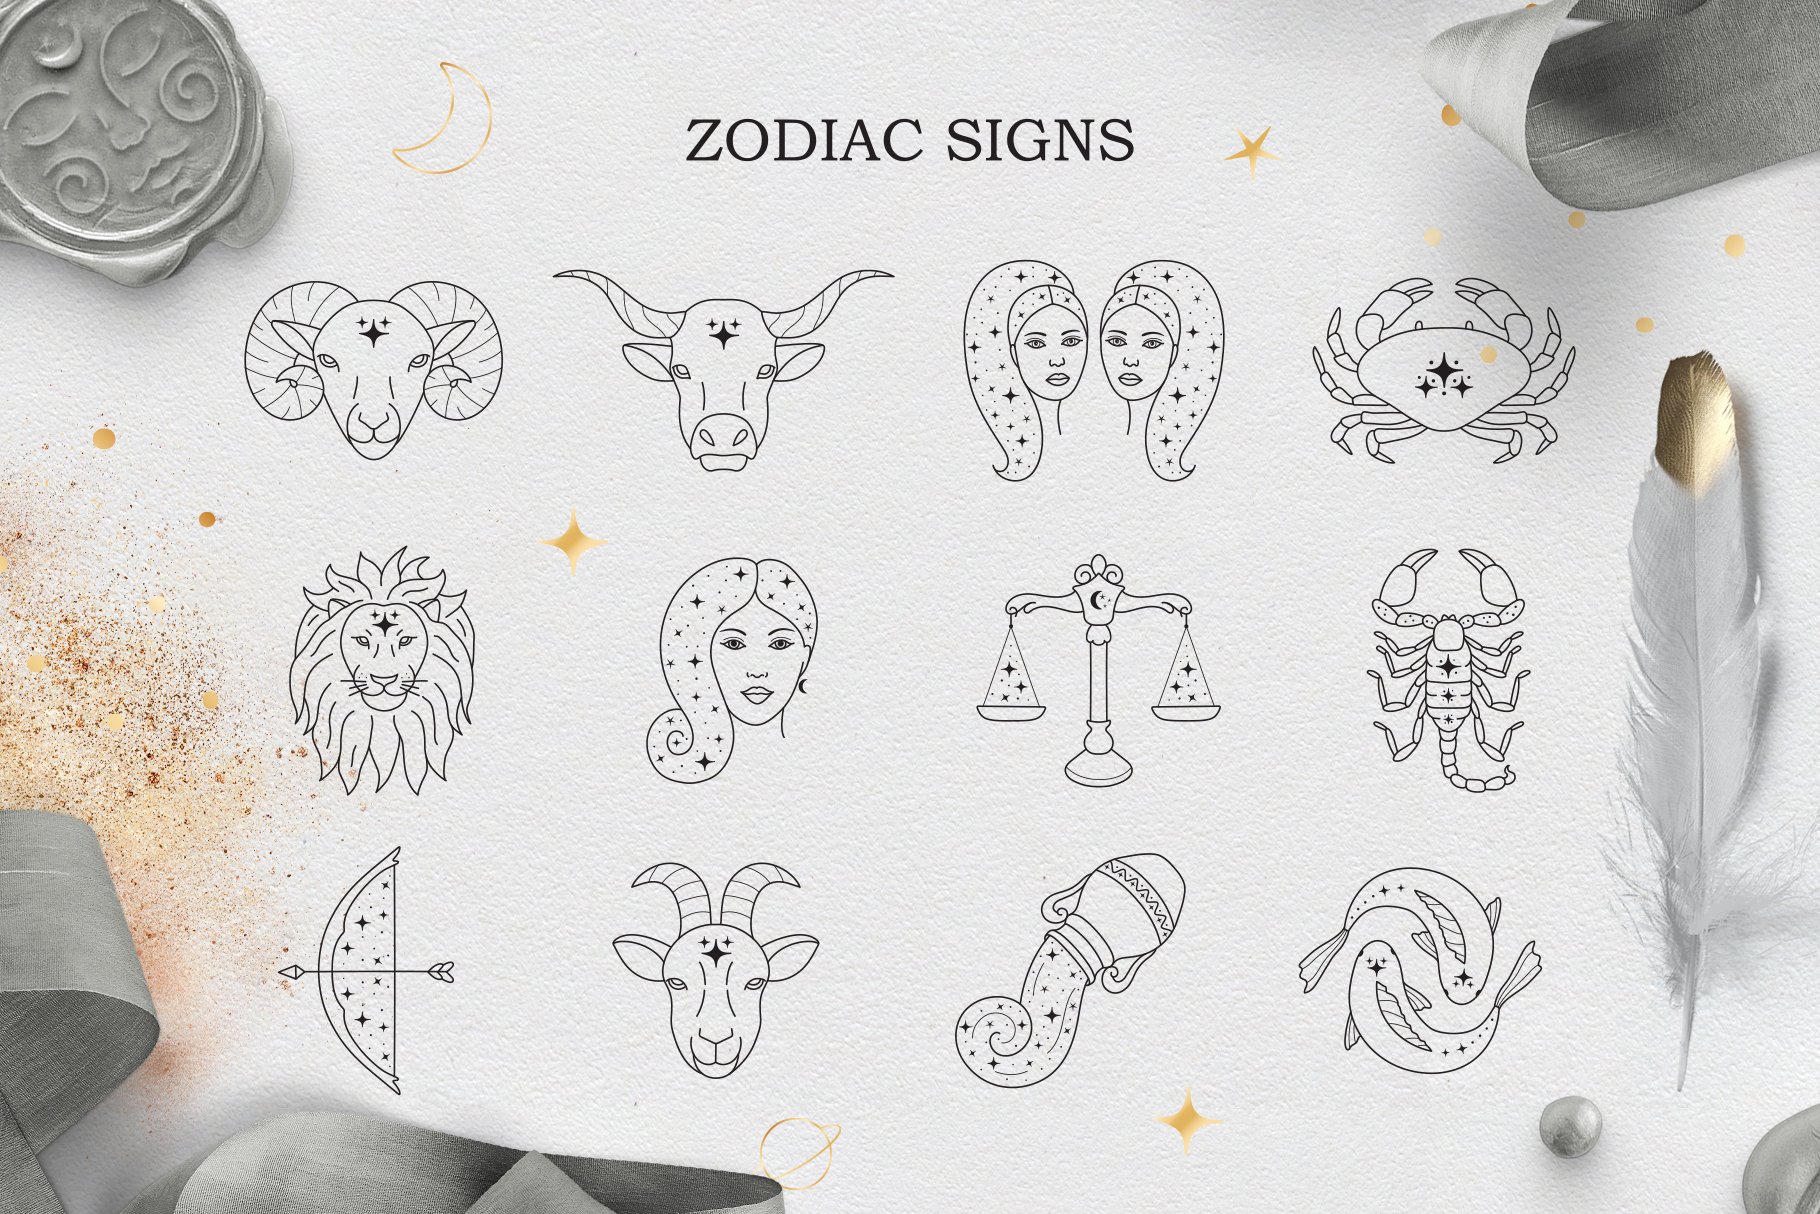 Zodiac signs and constellations preview image.